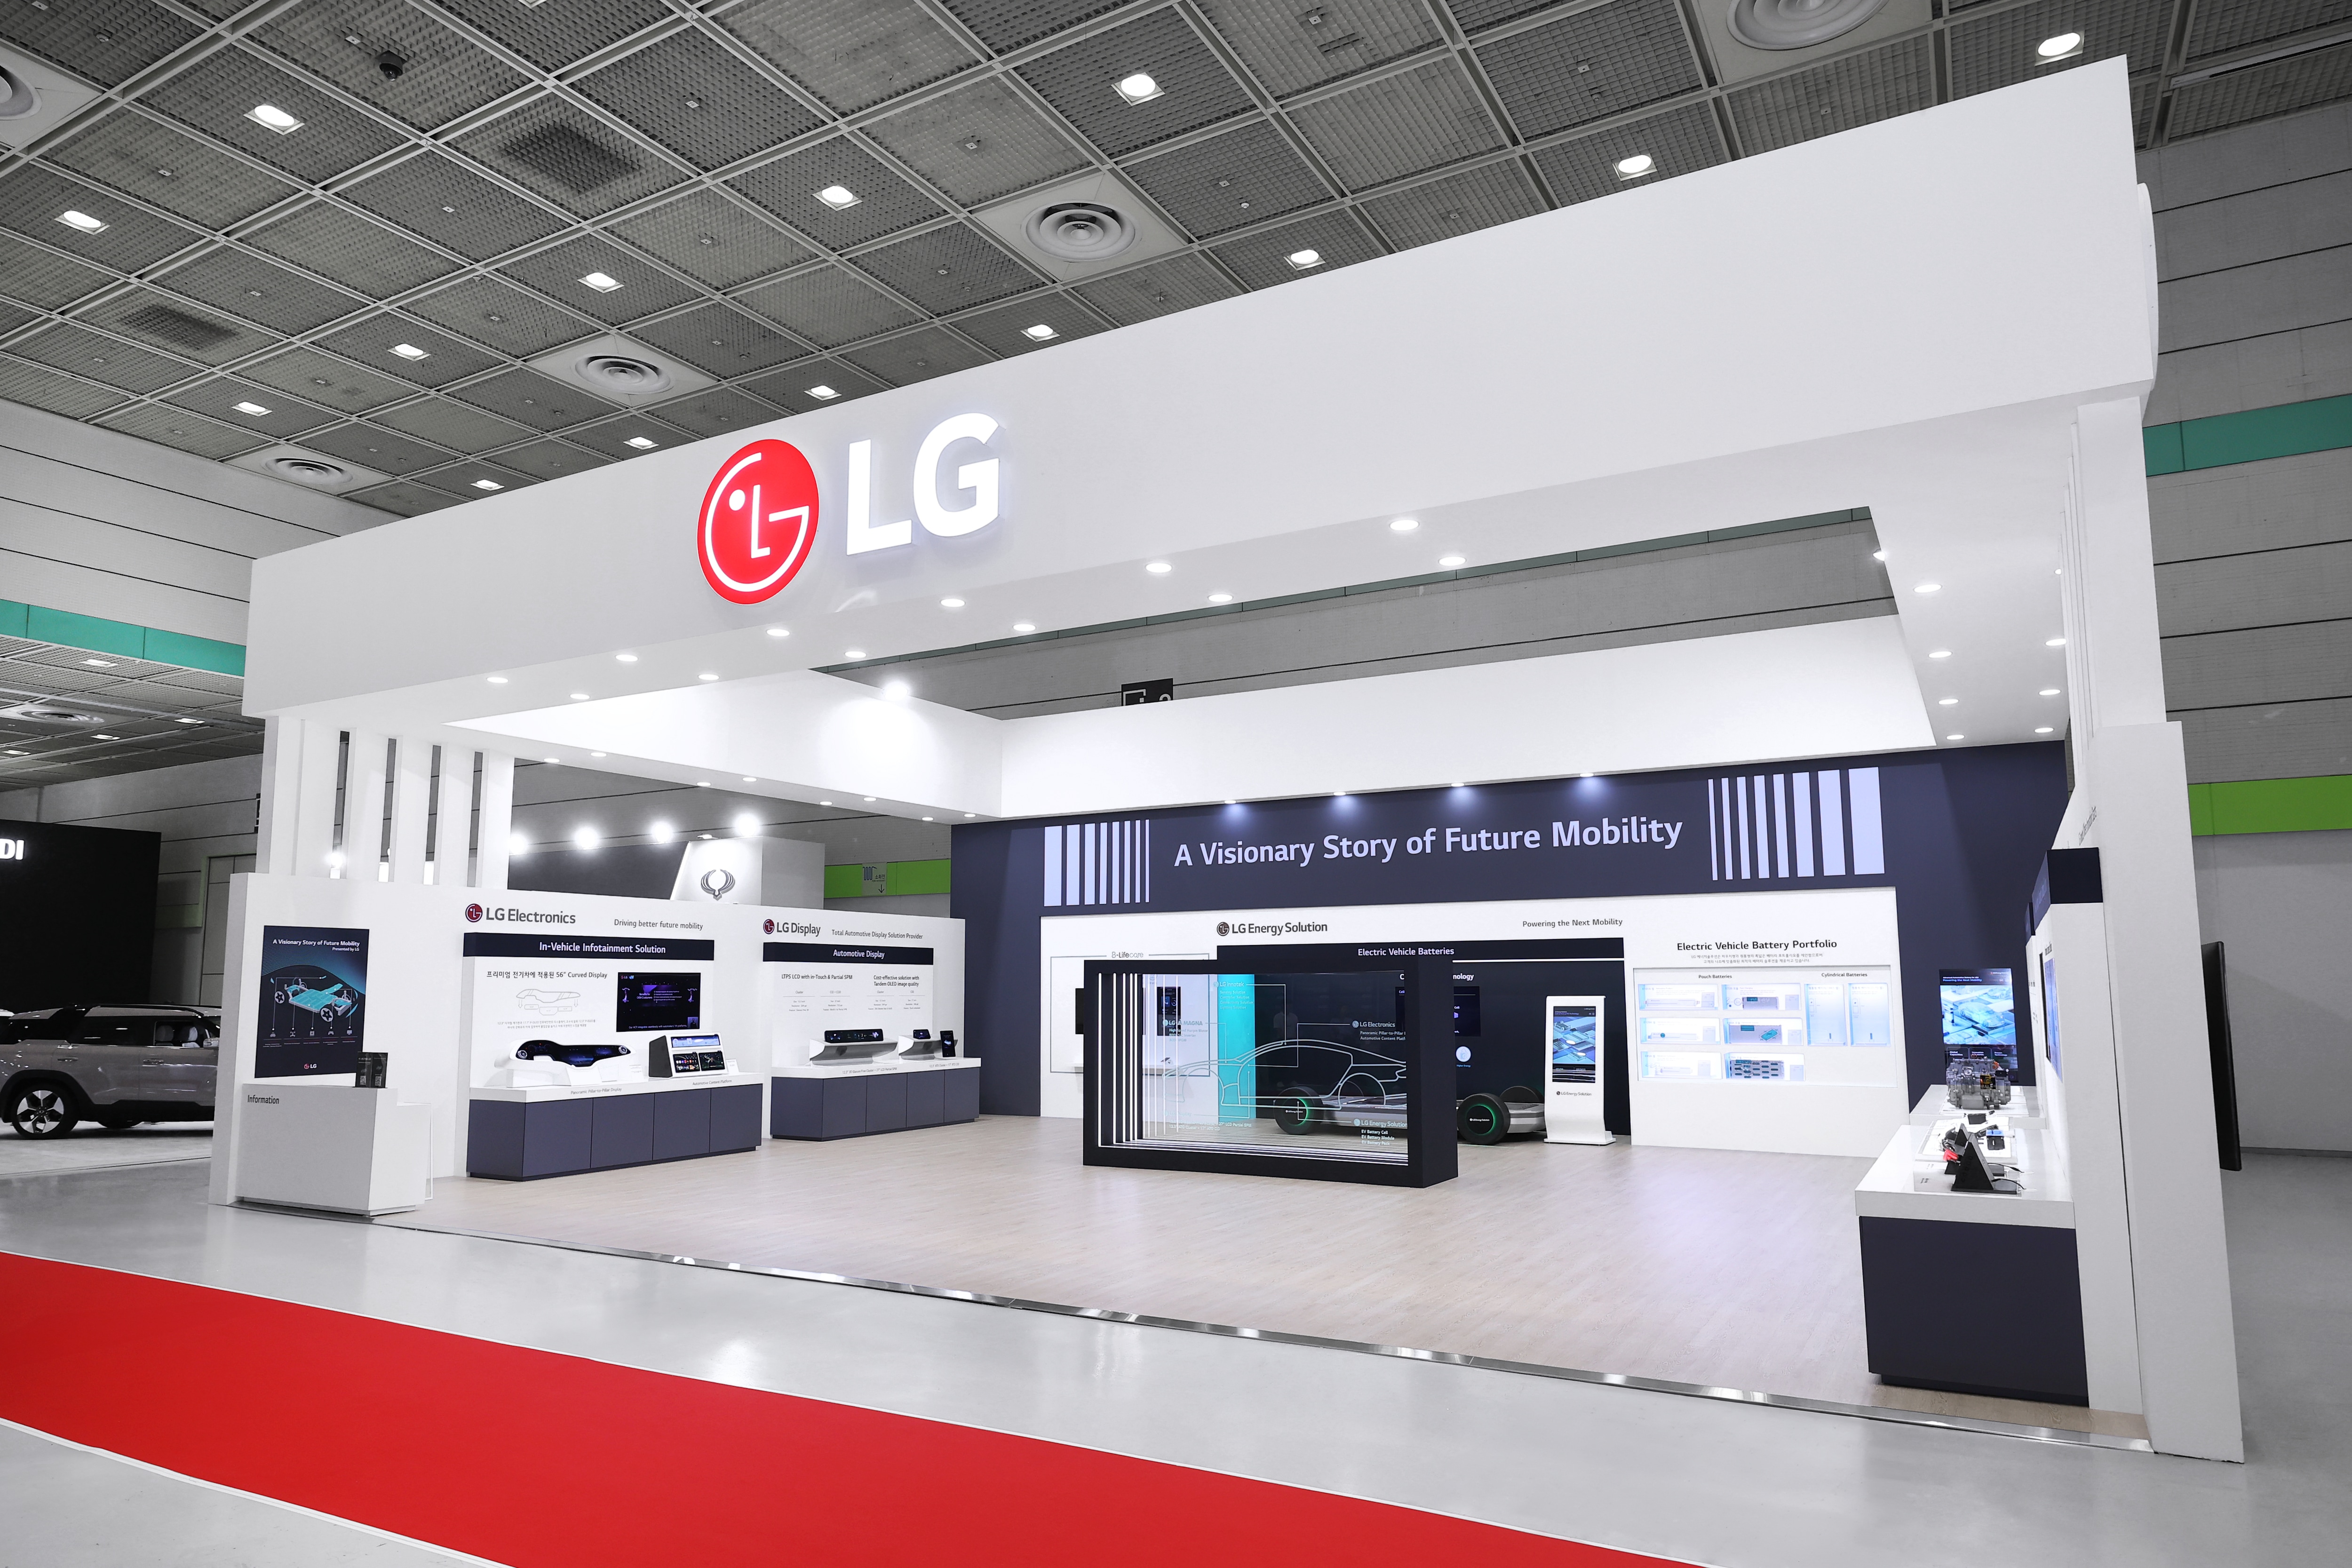 lg at 37th international electric vehicle symposium and exhibition-02